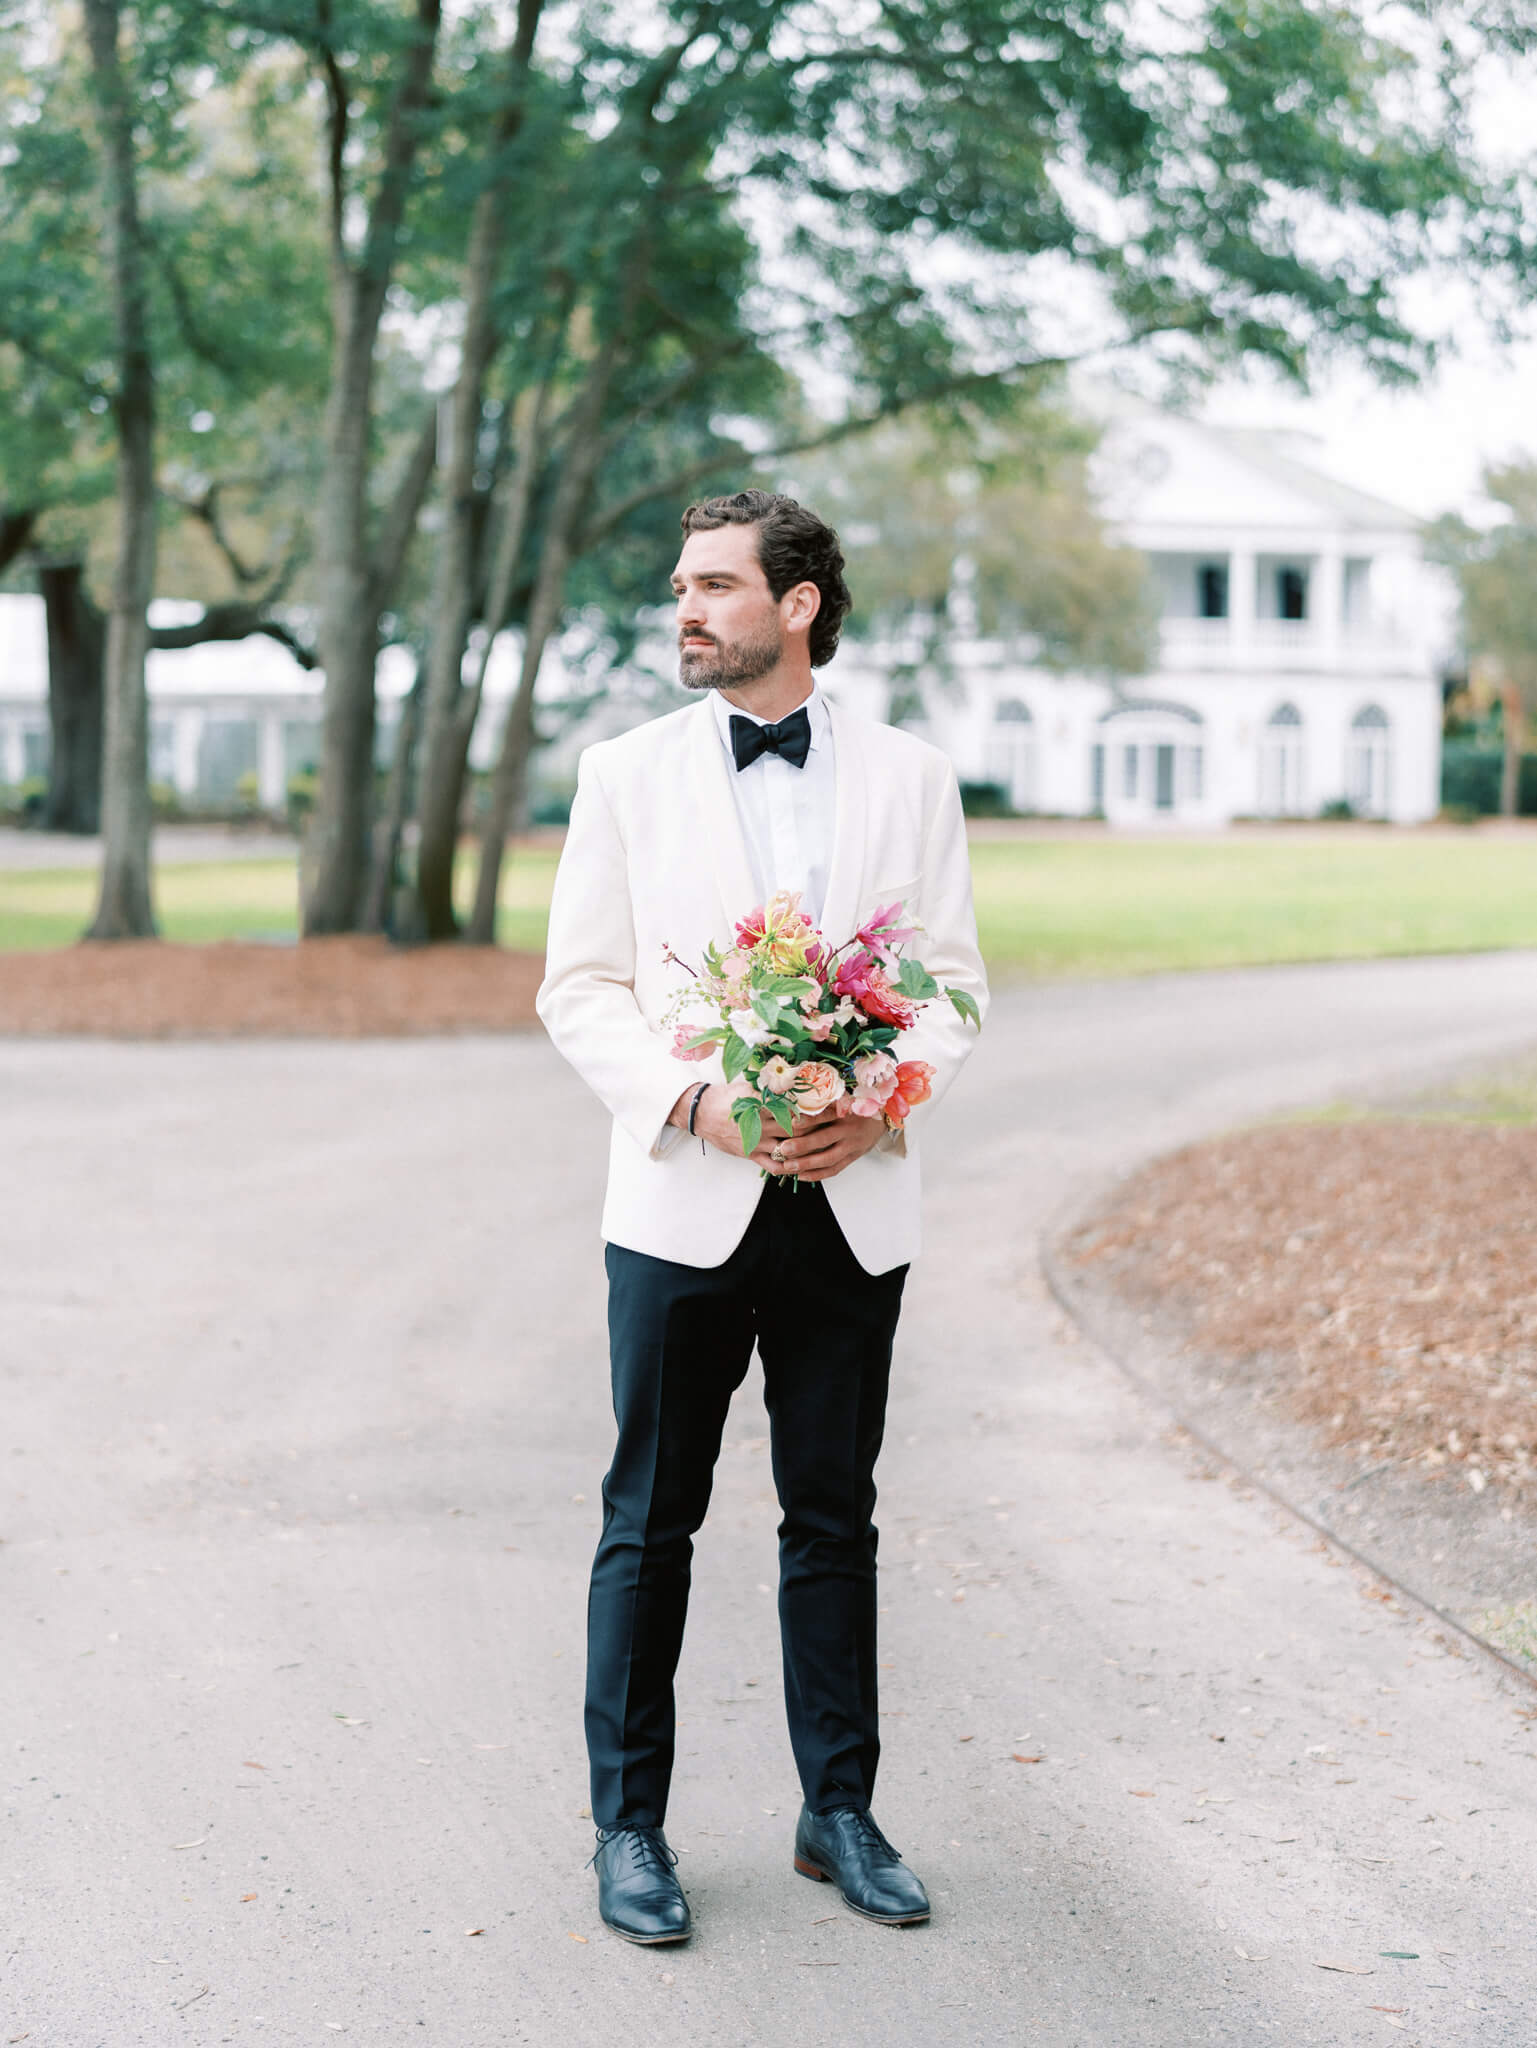 A groom holding a bouquet and wearing a d black and white tux standing in front of Lowndes Grove Wedding Venue.